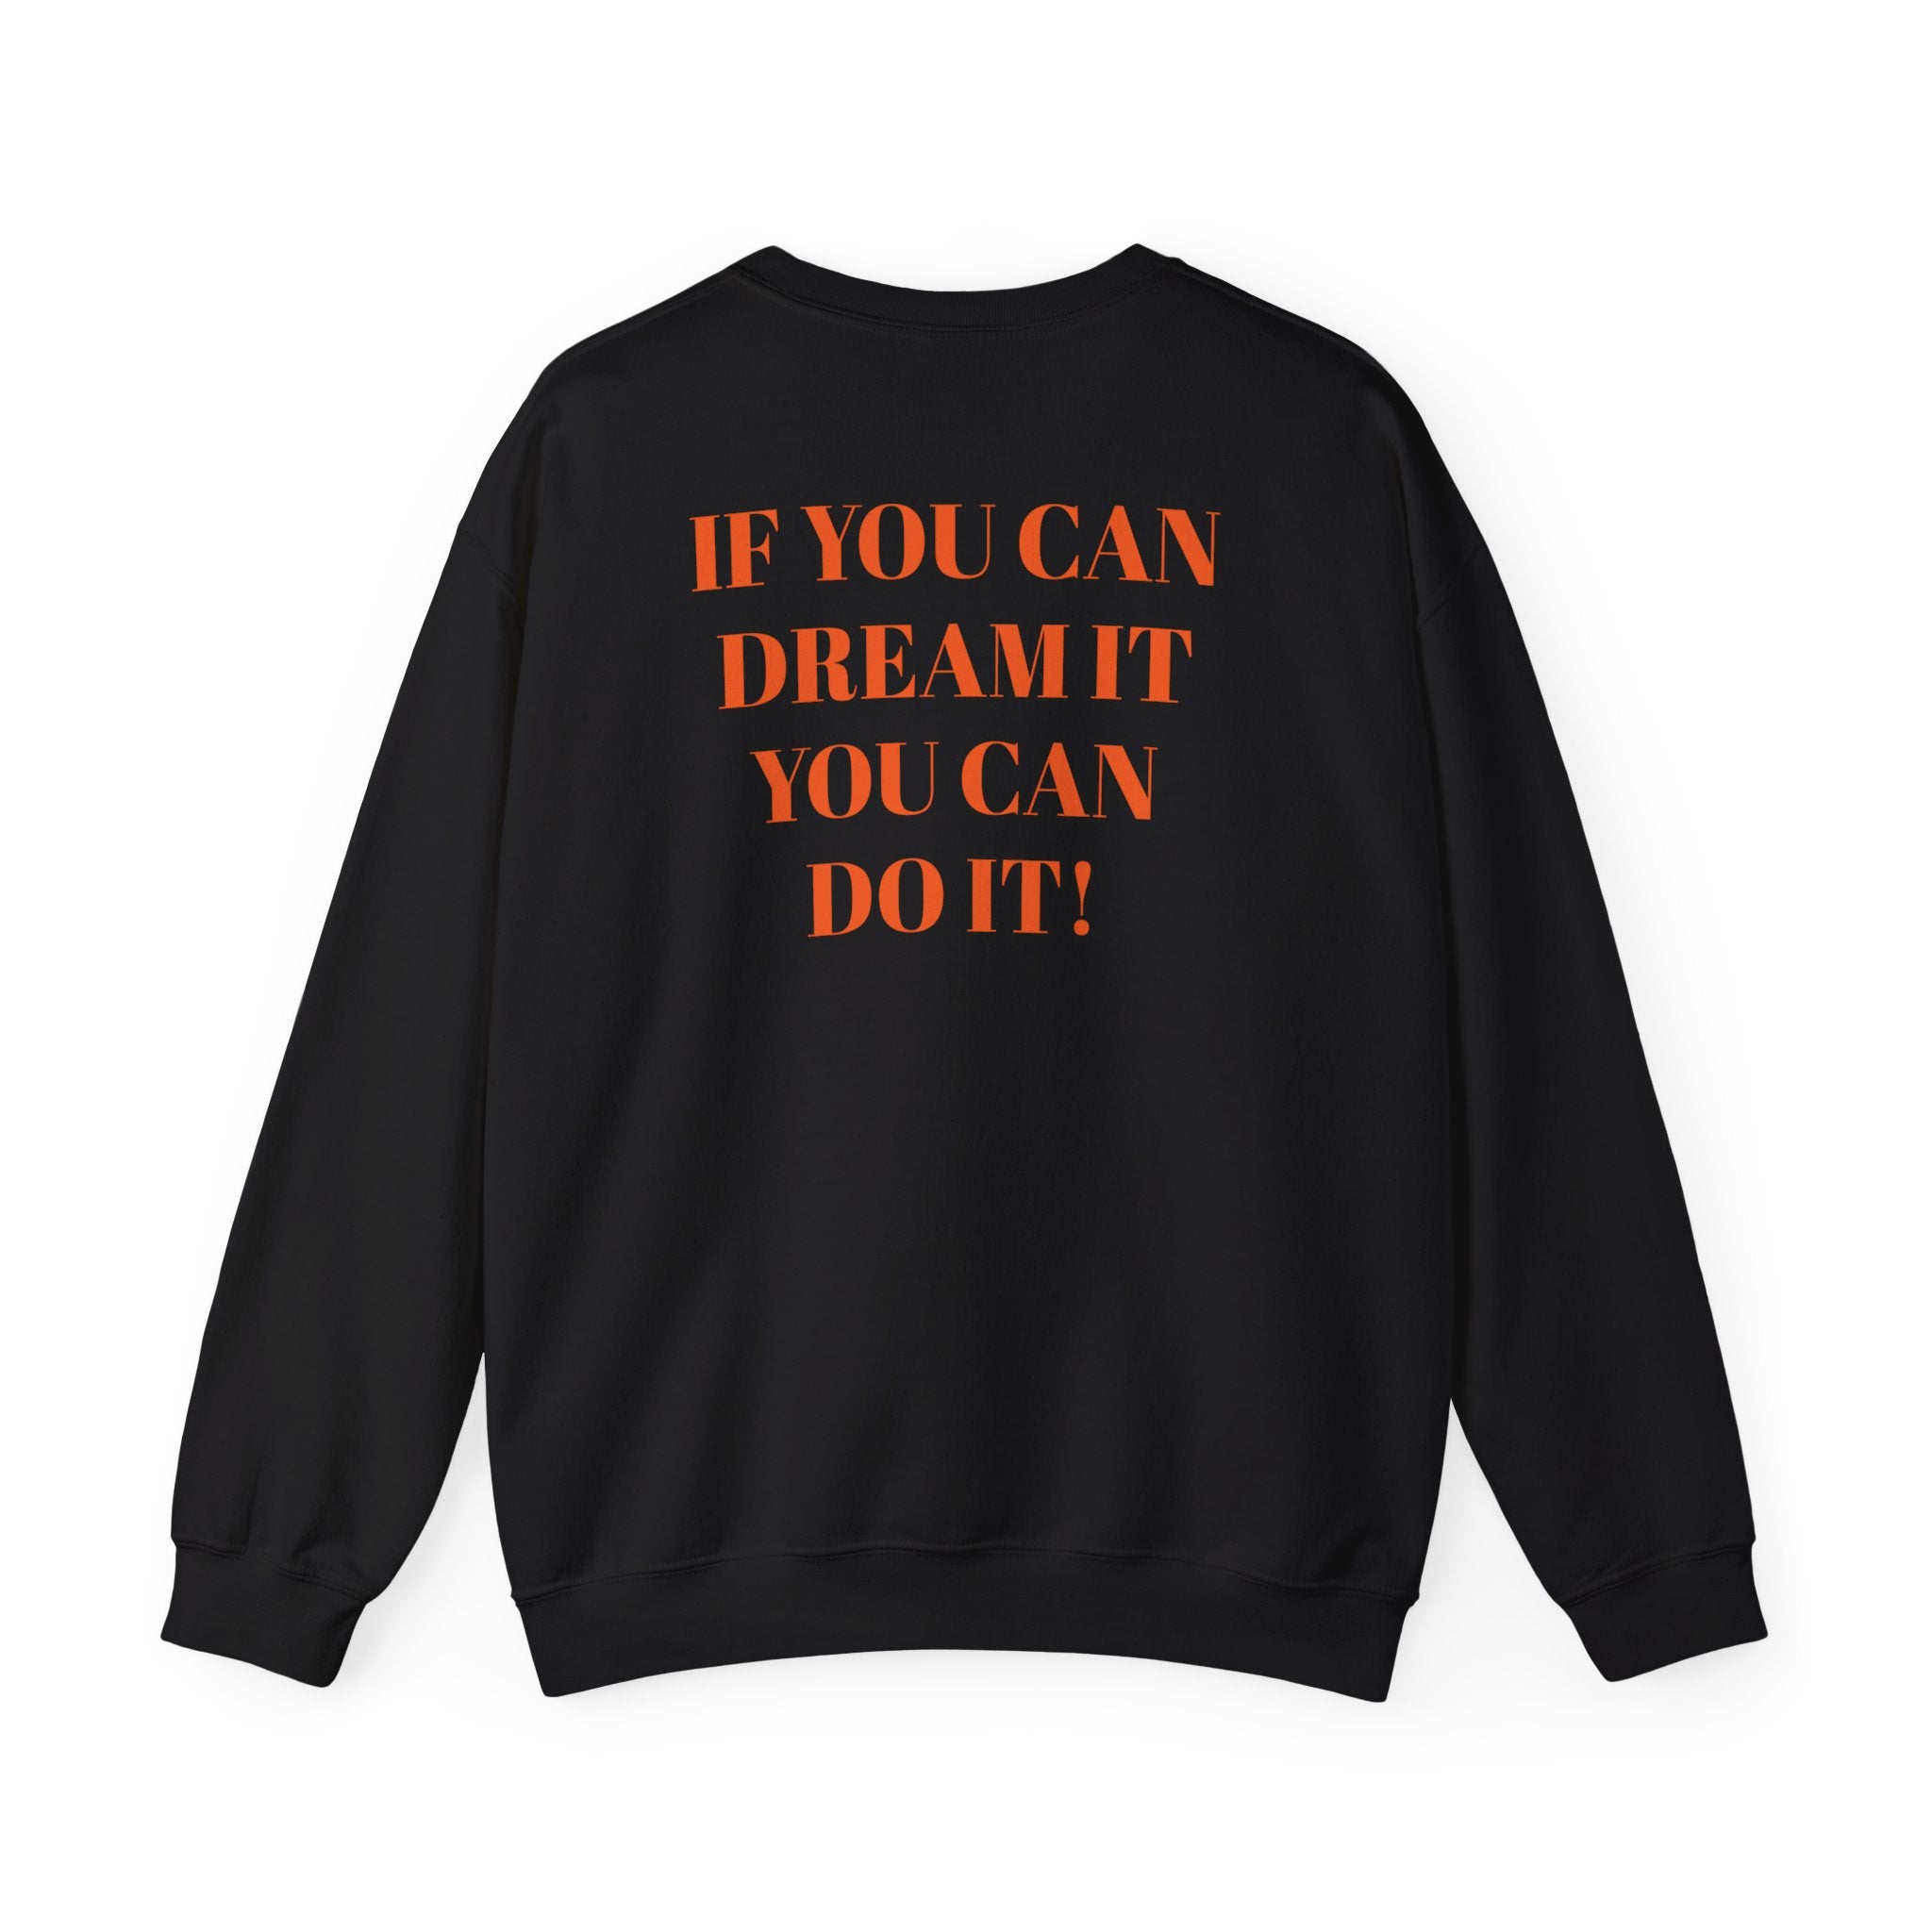 IF YOU CAN DREAM IT YOU CAN DO IT Crewneck Sweatshirt